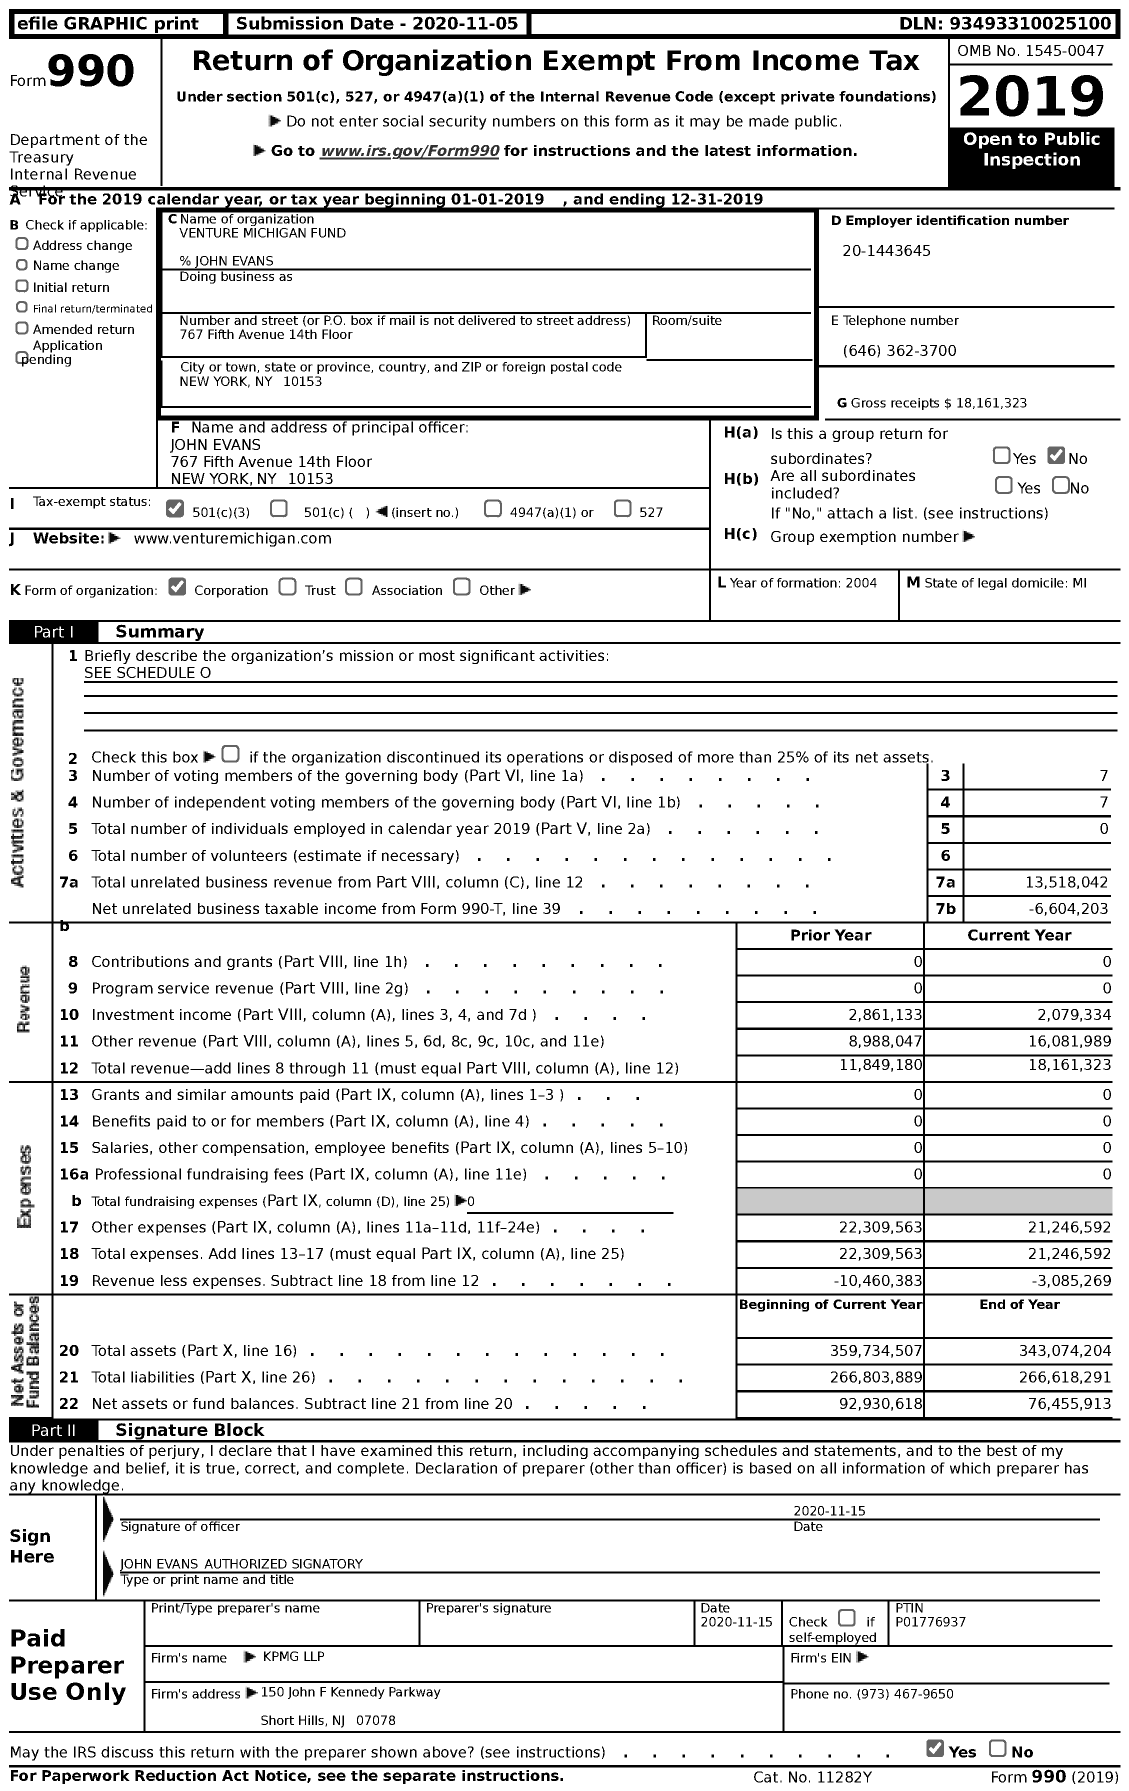 Image of first page of 2019 Form 990 for Venture Michigan Fund (VMF)